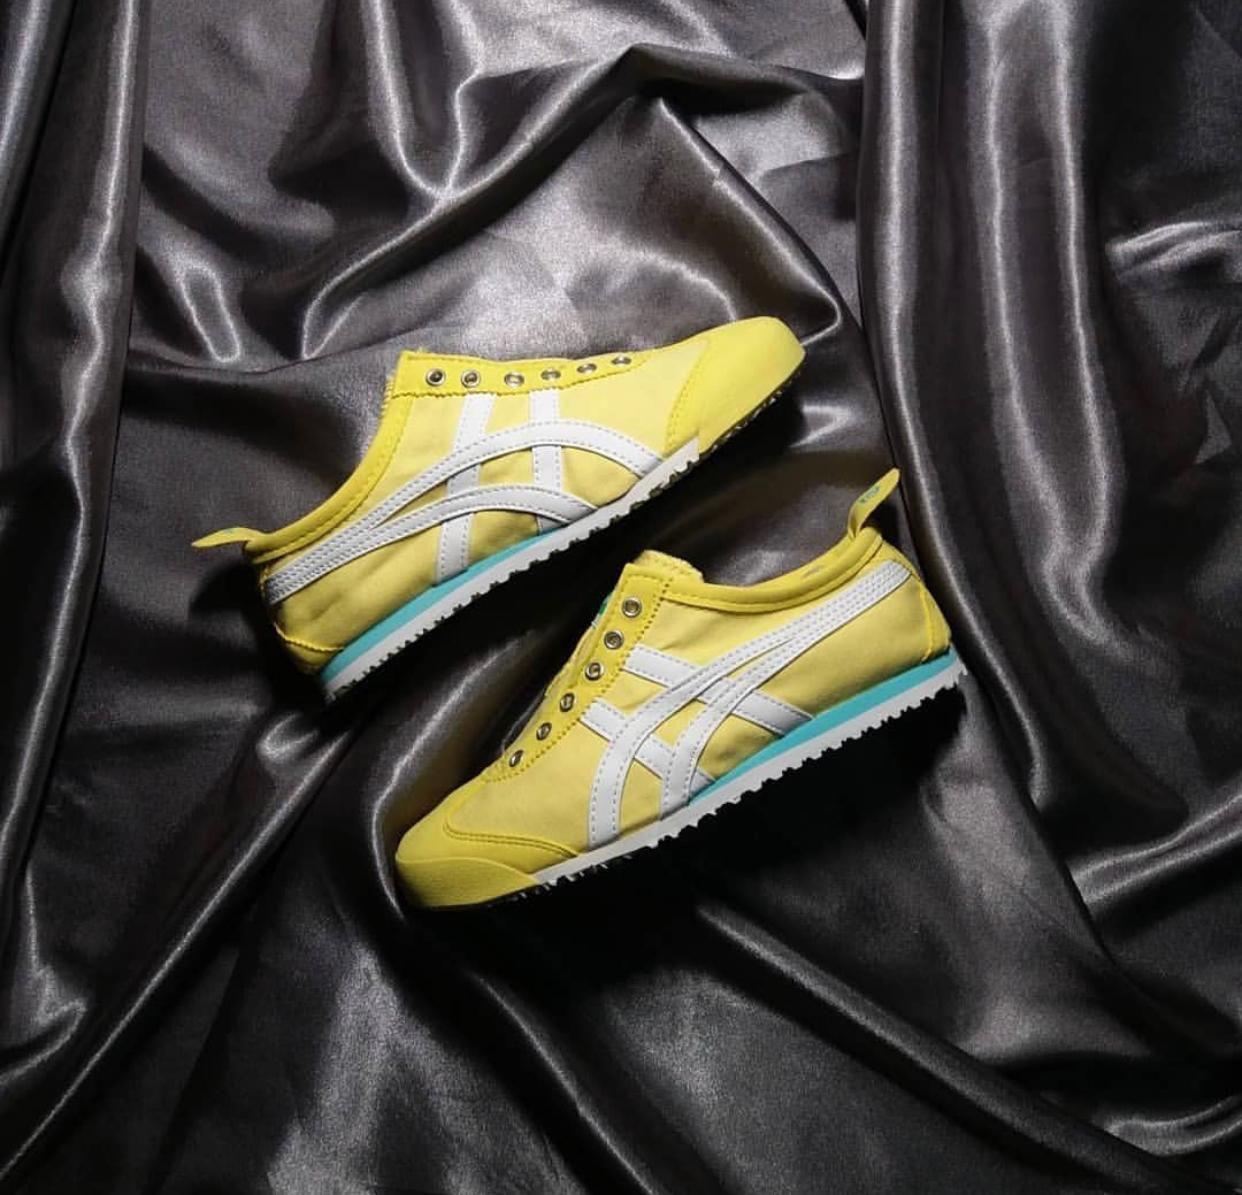 First Copy Onitsuka tiger 66 slip on “Yellow